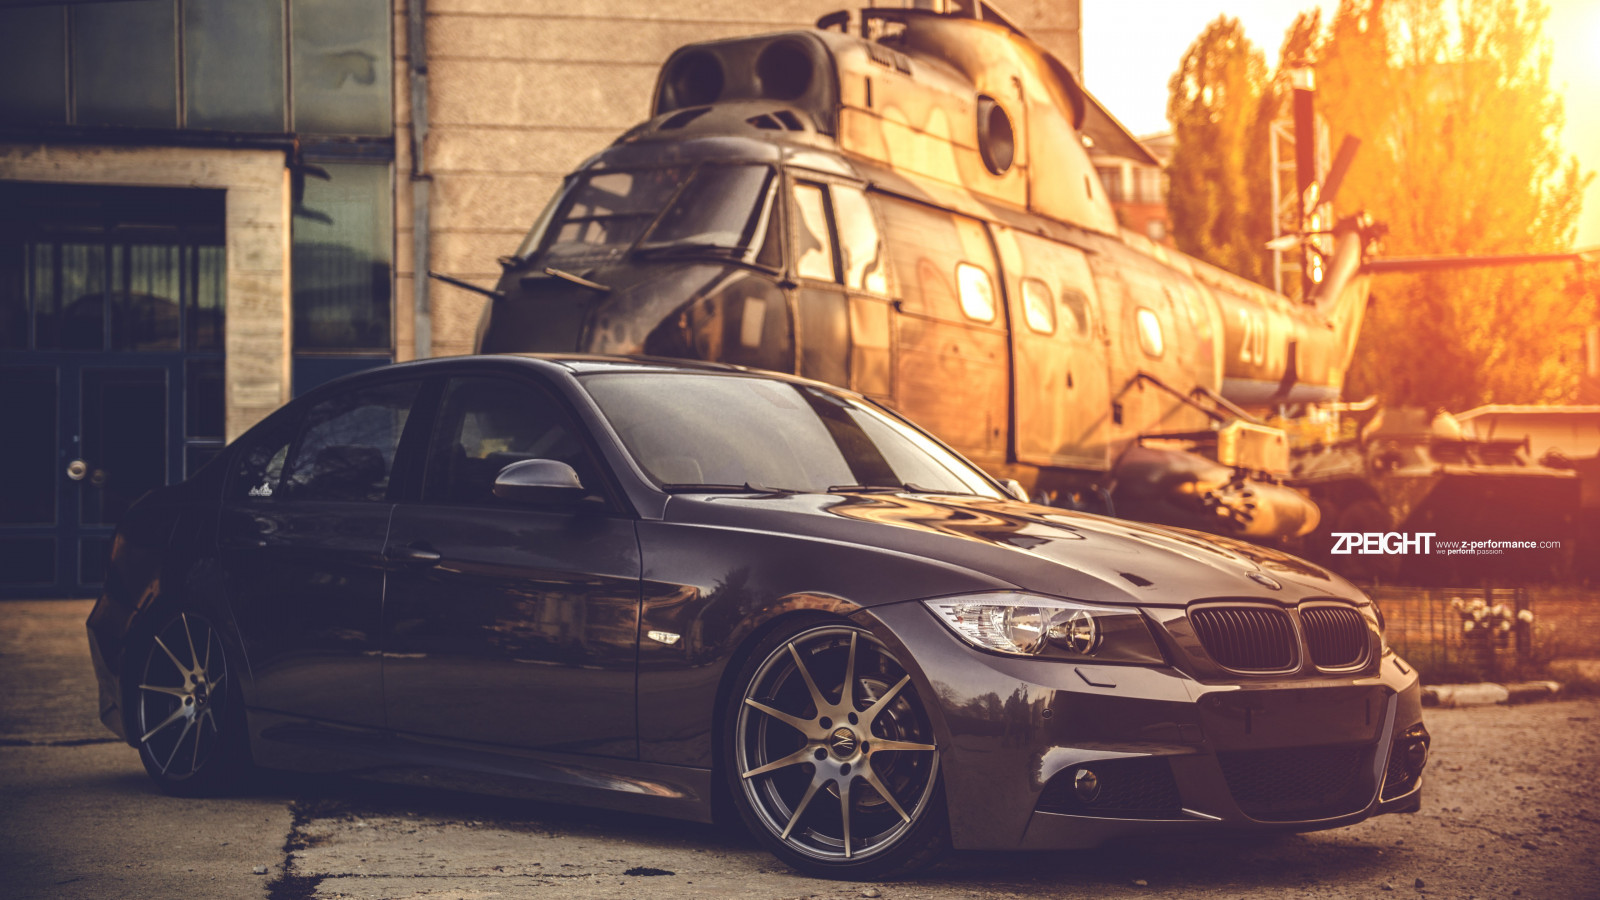 BMW E90 and one helicopter wallpaper 1600x900